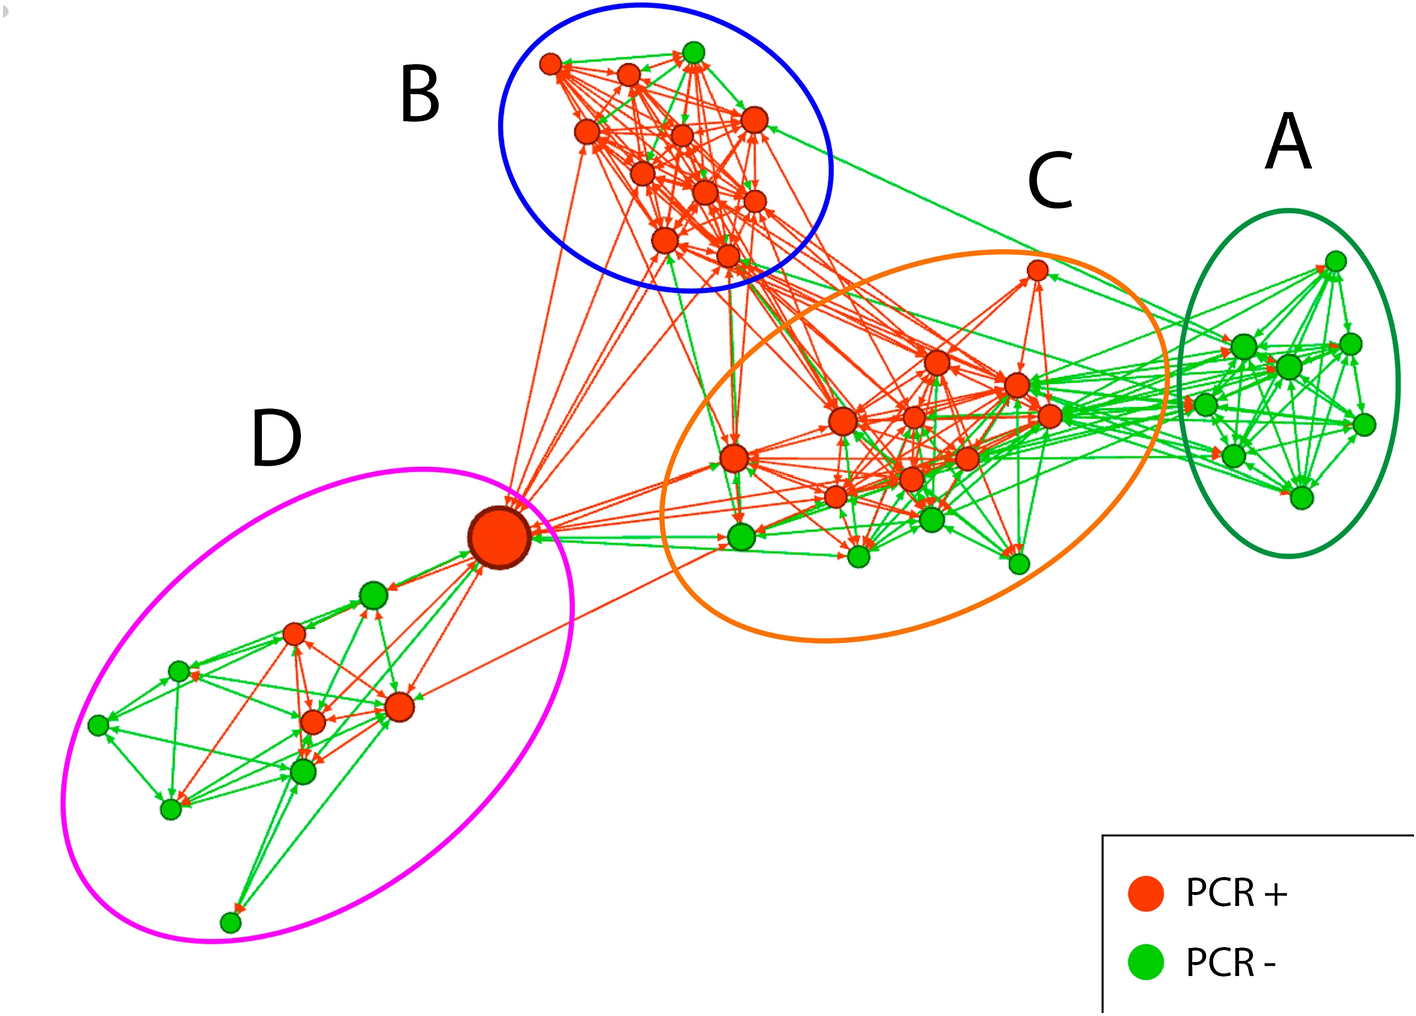 Identification of cohesive subgroups in a university hall of residence  during the COVID-19 pandemic using a social network analysis approach |  Scientific Reports